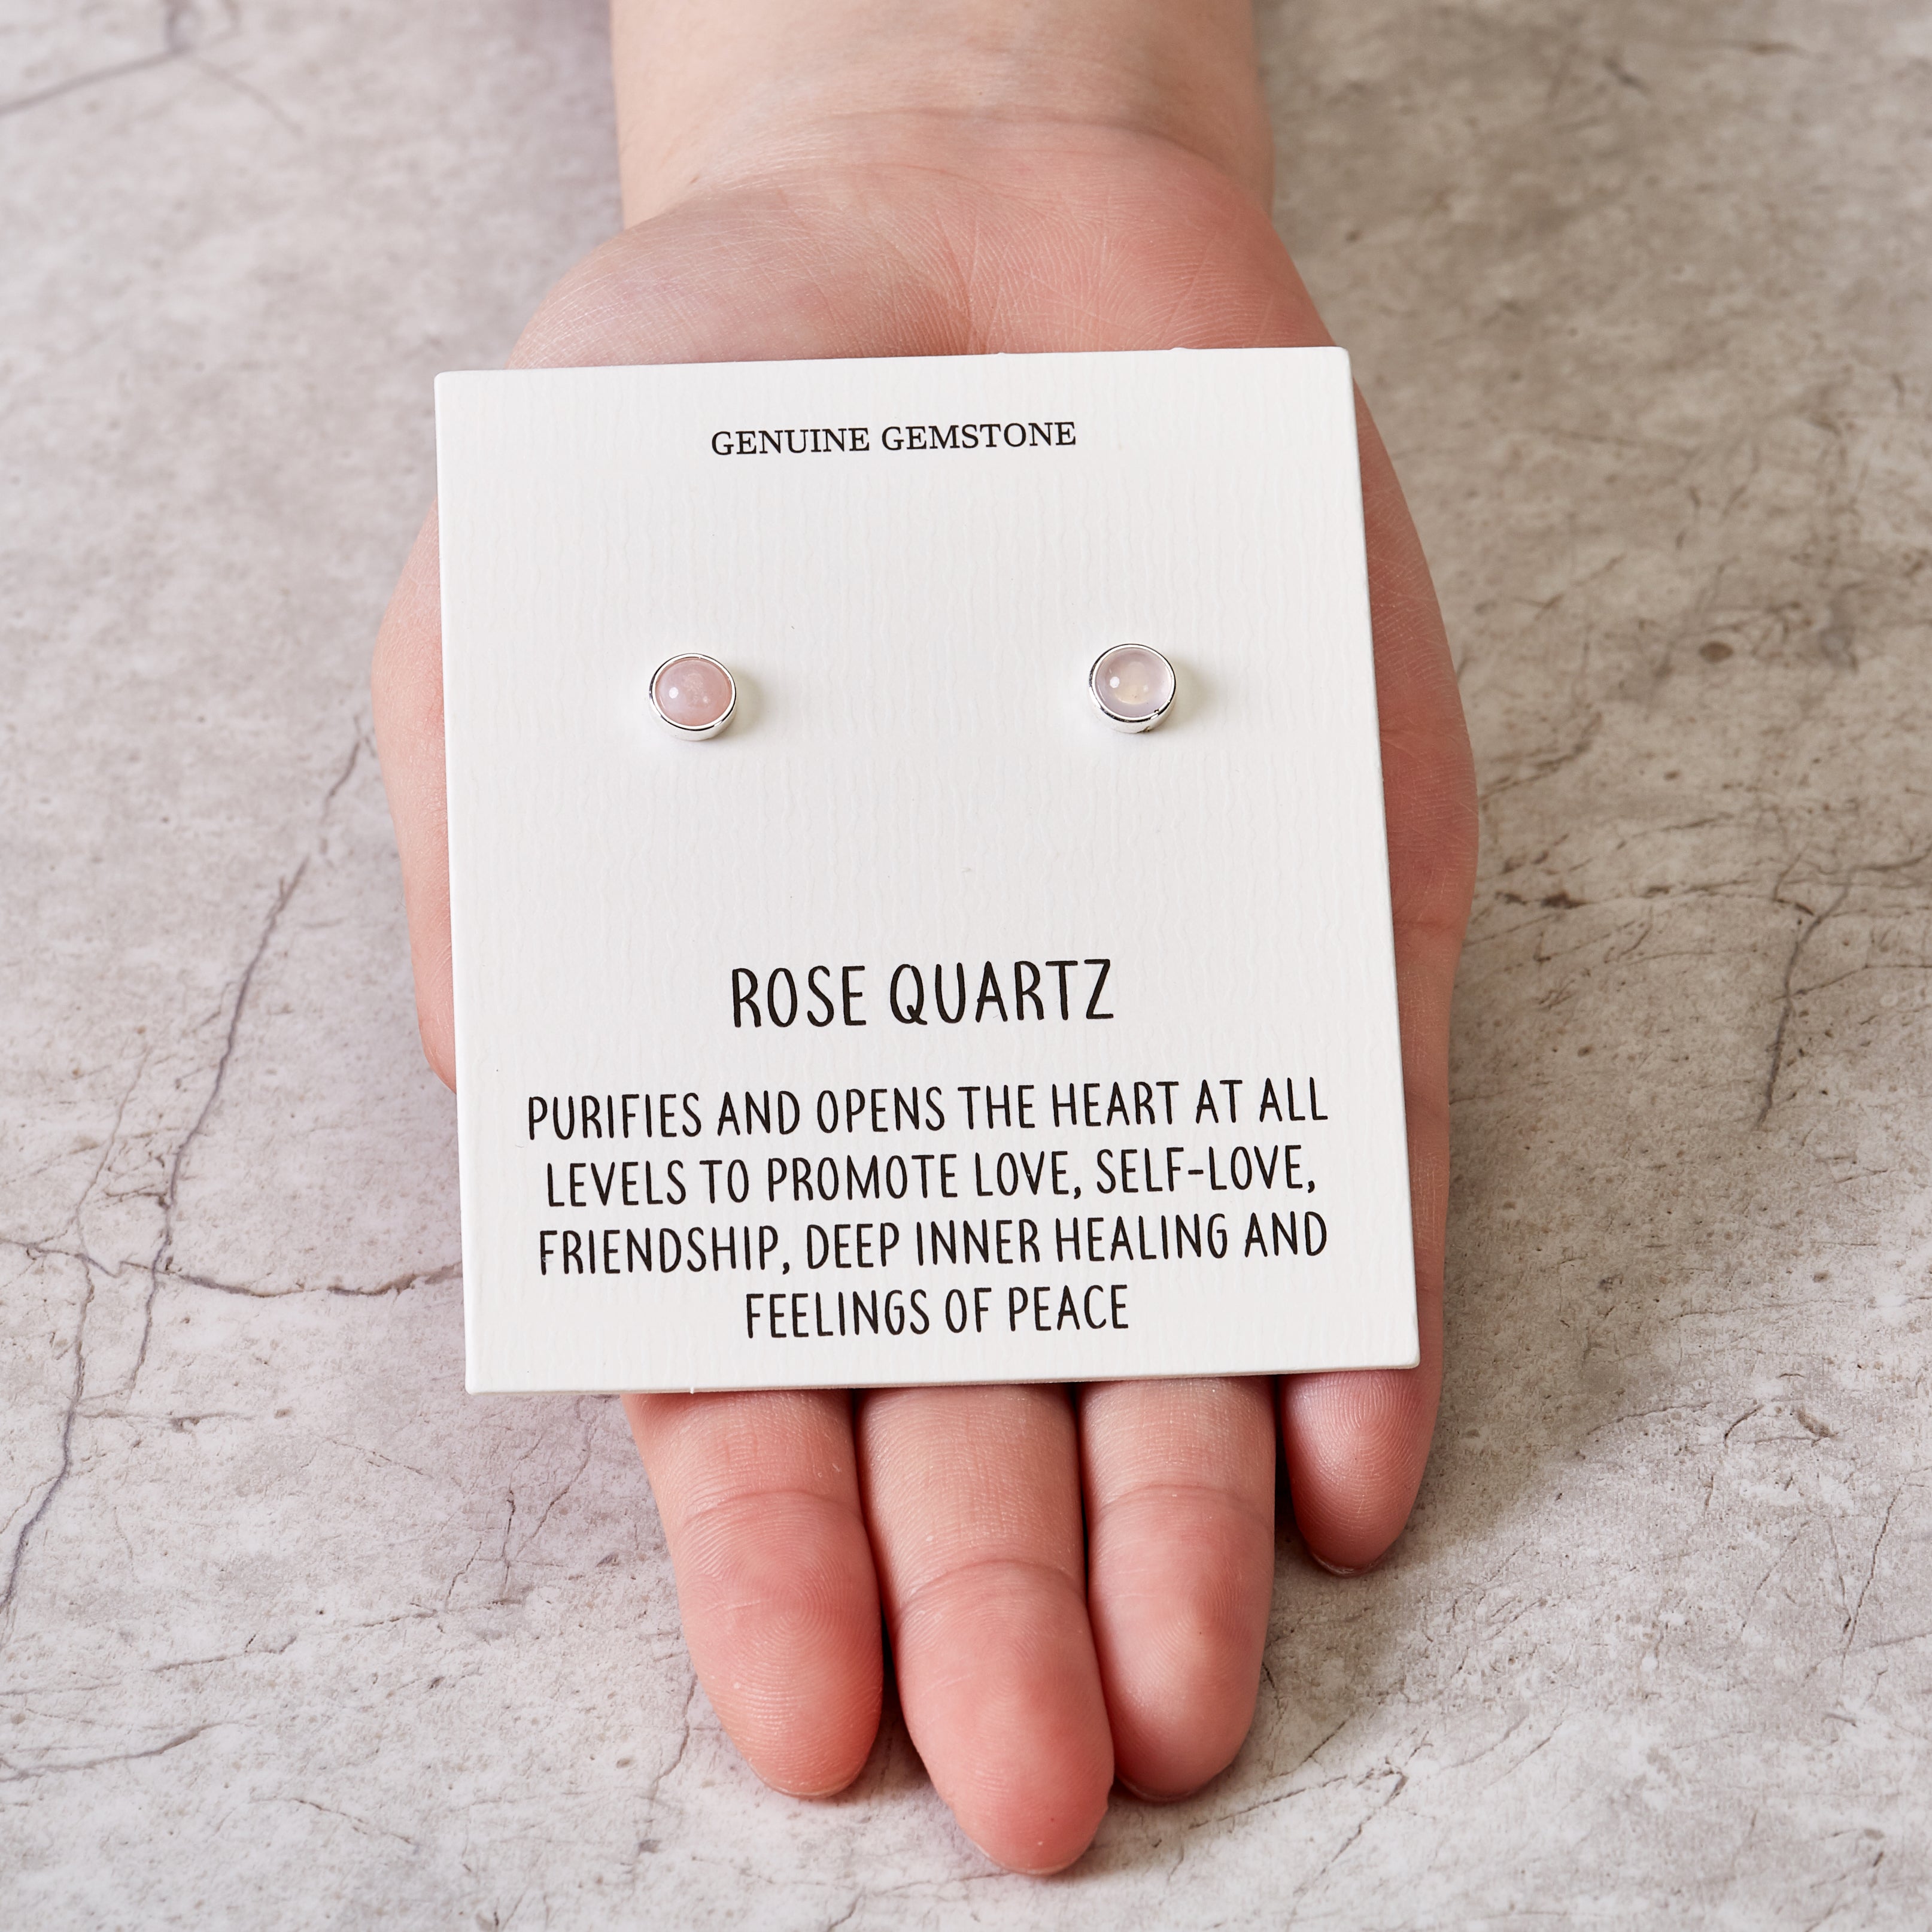 Rose Quartz Stud Earrings with Quote Card